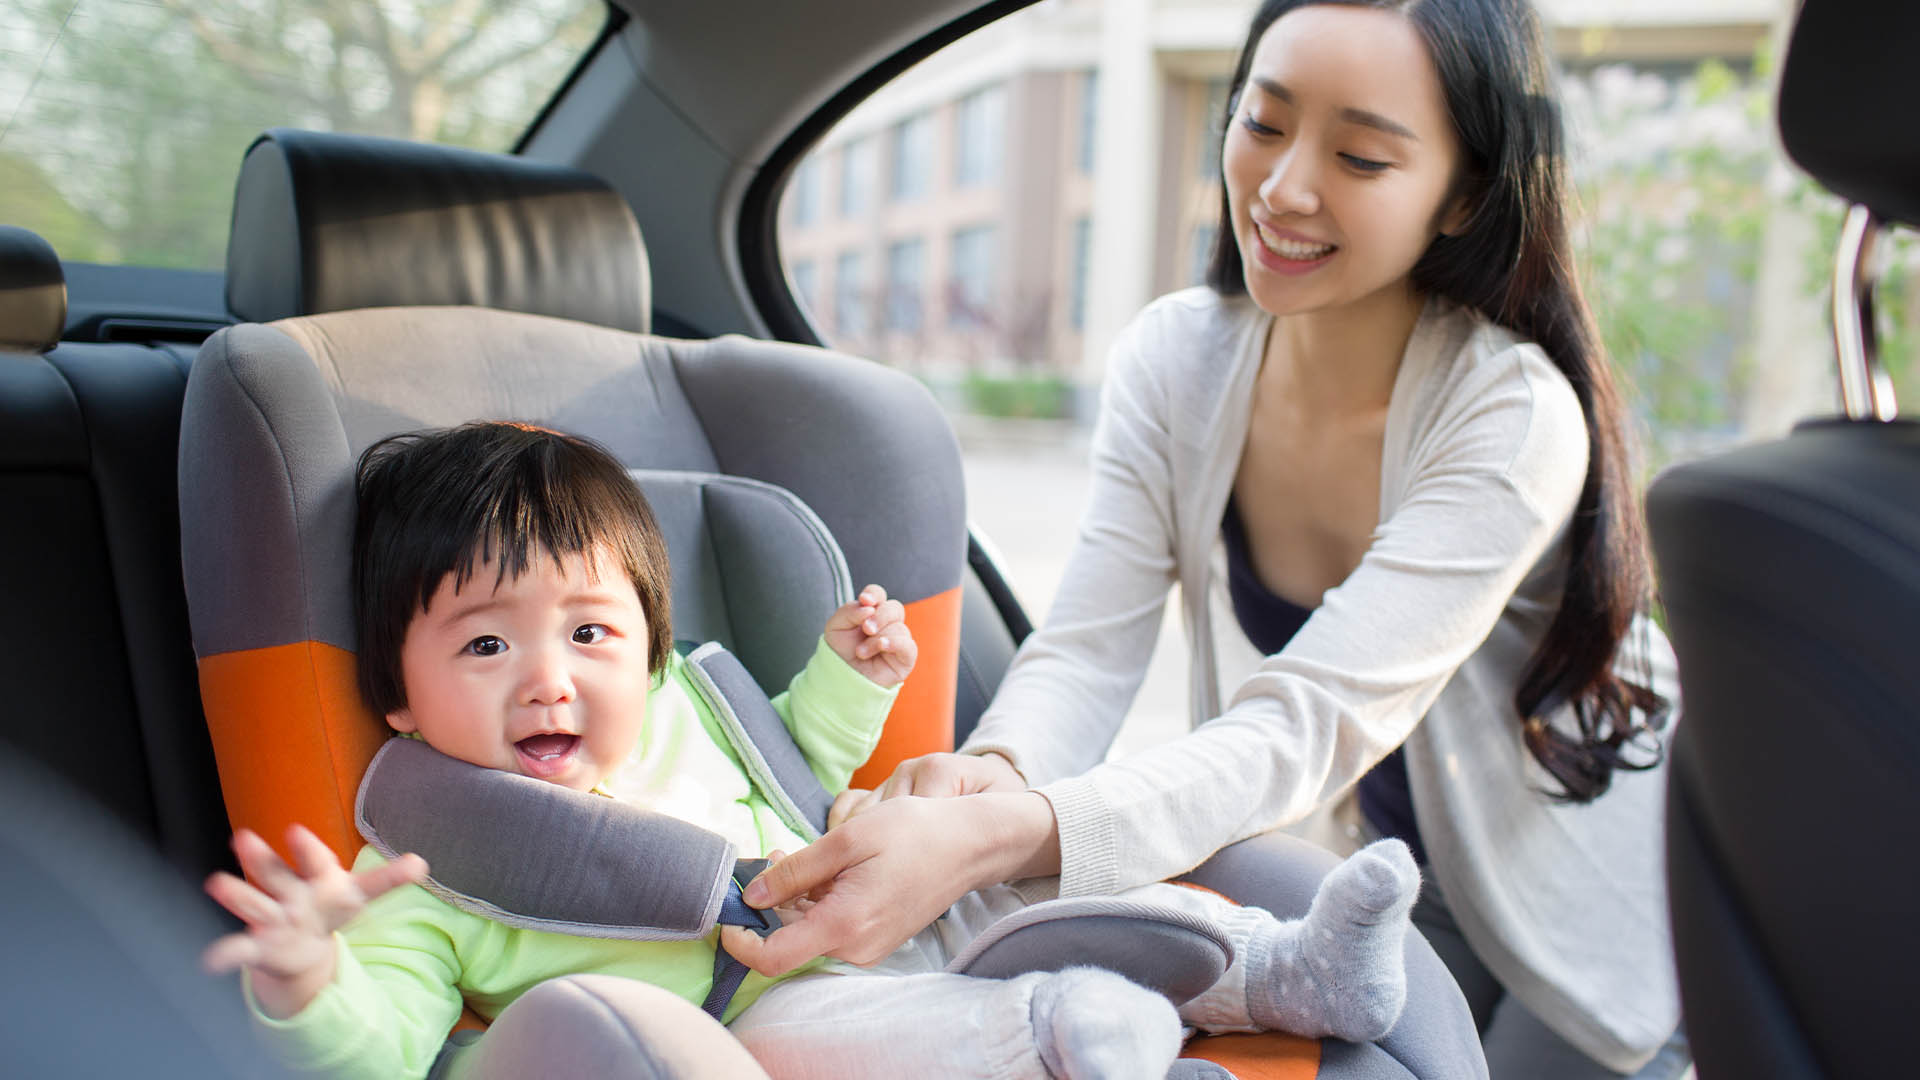 A mother fastening her child into a car seat